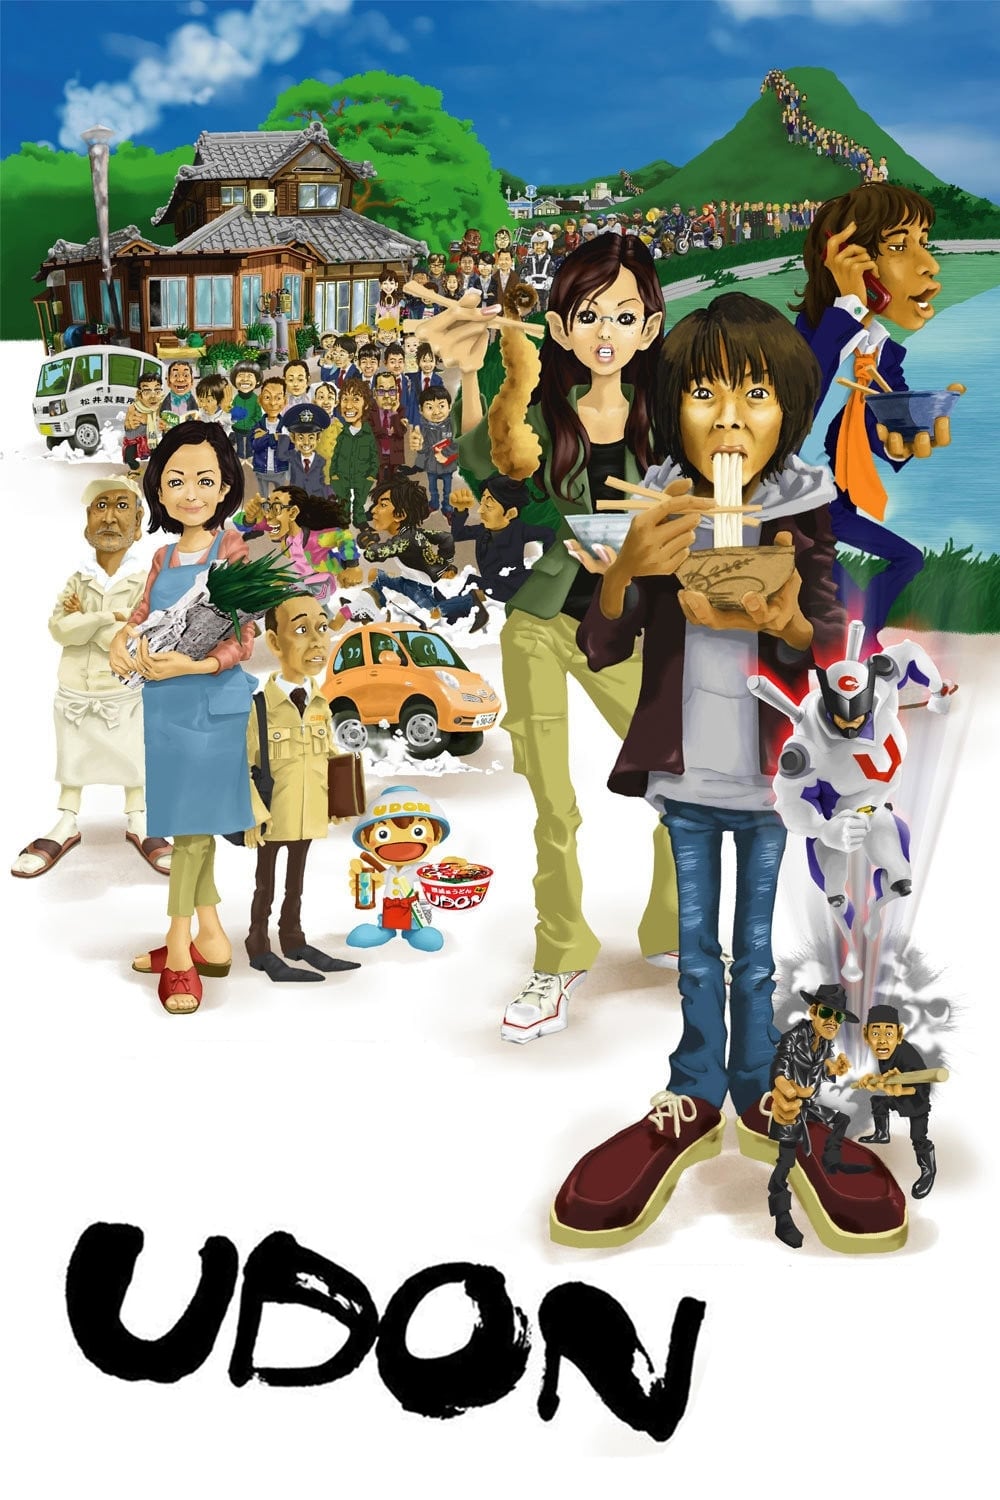 UDON (2006)